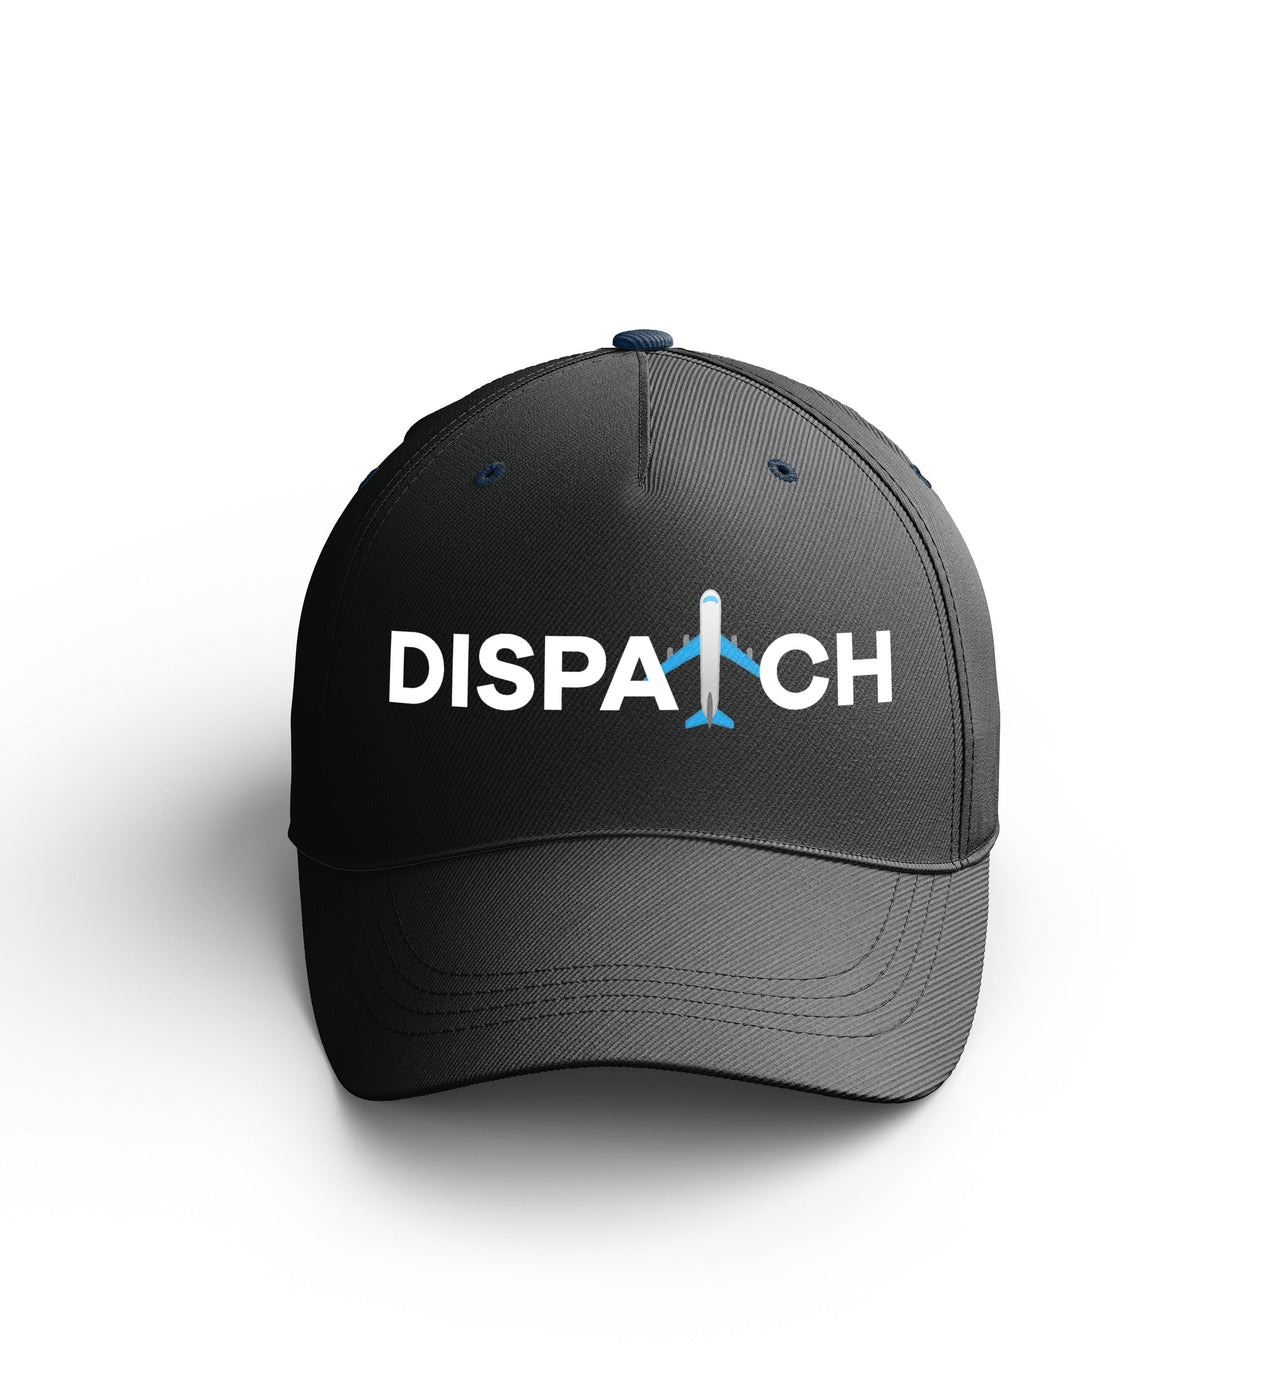 Customizable Name & Dispatch Embroidered Hats